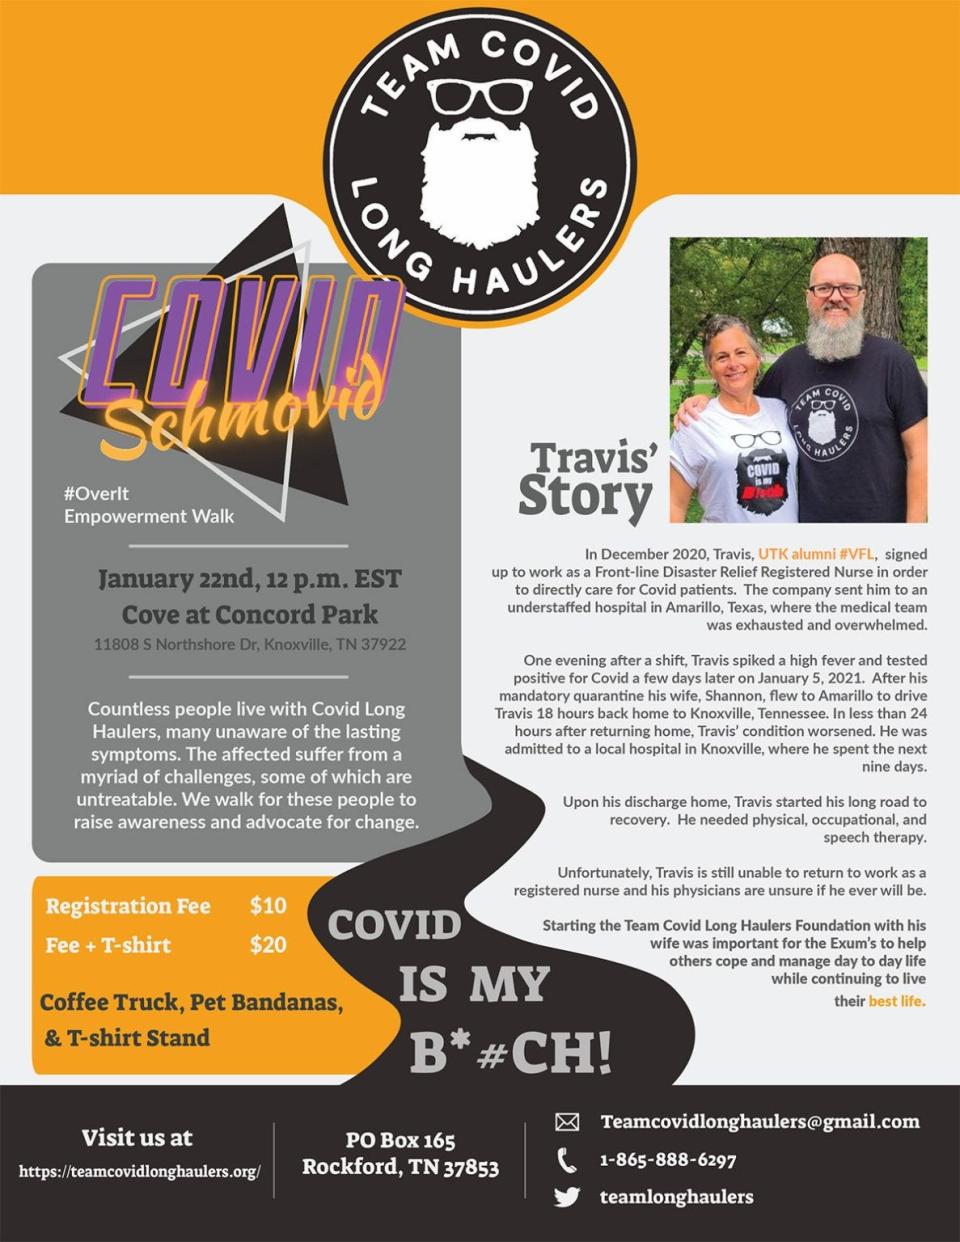 Travis and Shannon Exum founded Team COVID Long Haulers to rally around those who are dealing with the long form of the virus. This Saturday they’ll host a walk to support sufferers, their caregivers and families, and to fund research.